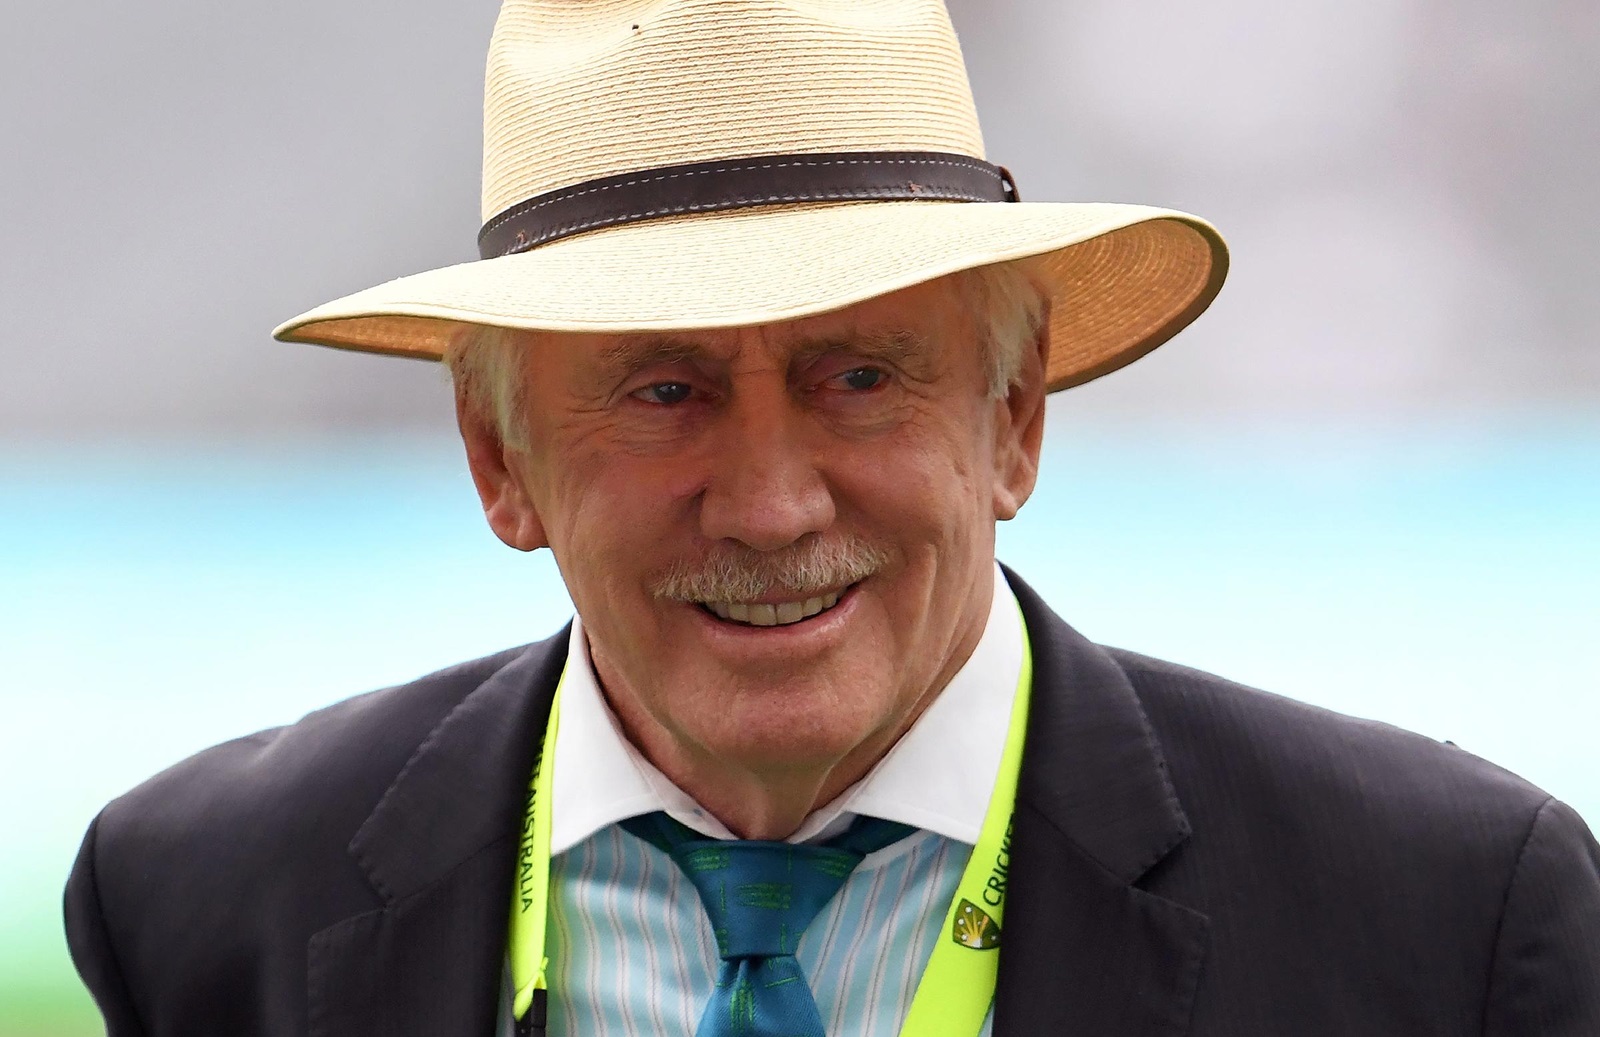 ‘Cheating Is Cheating’ – Ian Chappell Slams CA For Making Steve Smith As Test VC